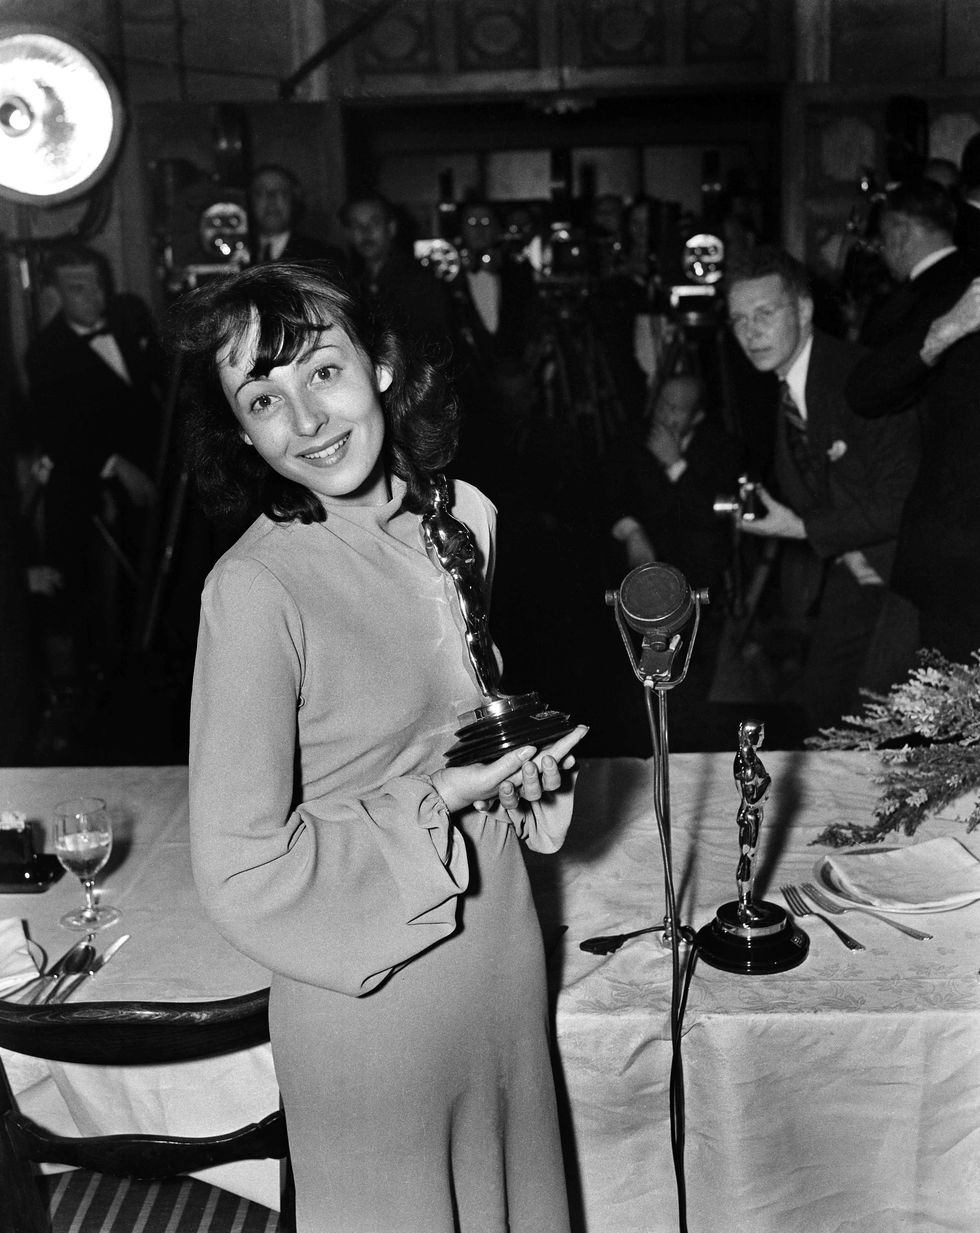 <p>The lovely Luise Rainer becomes the first actor to win an award in two consecutive years, this time for <i data-redactor-tag="i">The Good Earth, </i>and again attends the awards without makeup but has found a formal gown.<br></p>